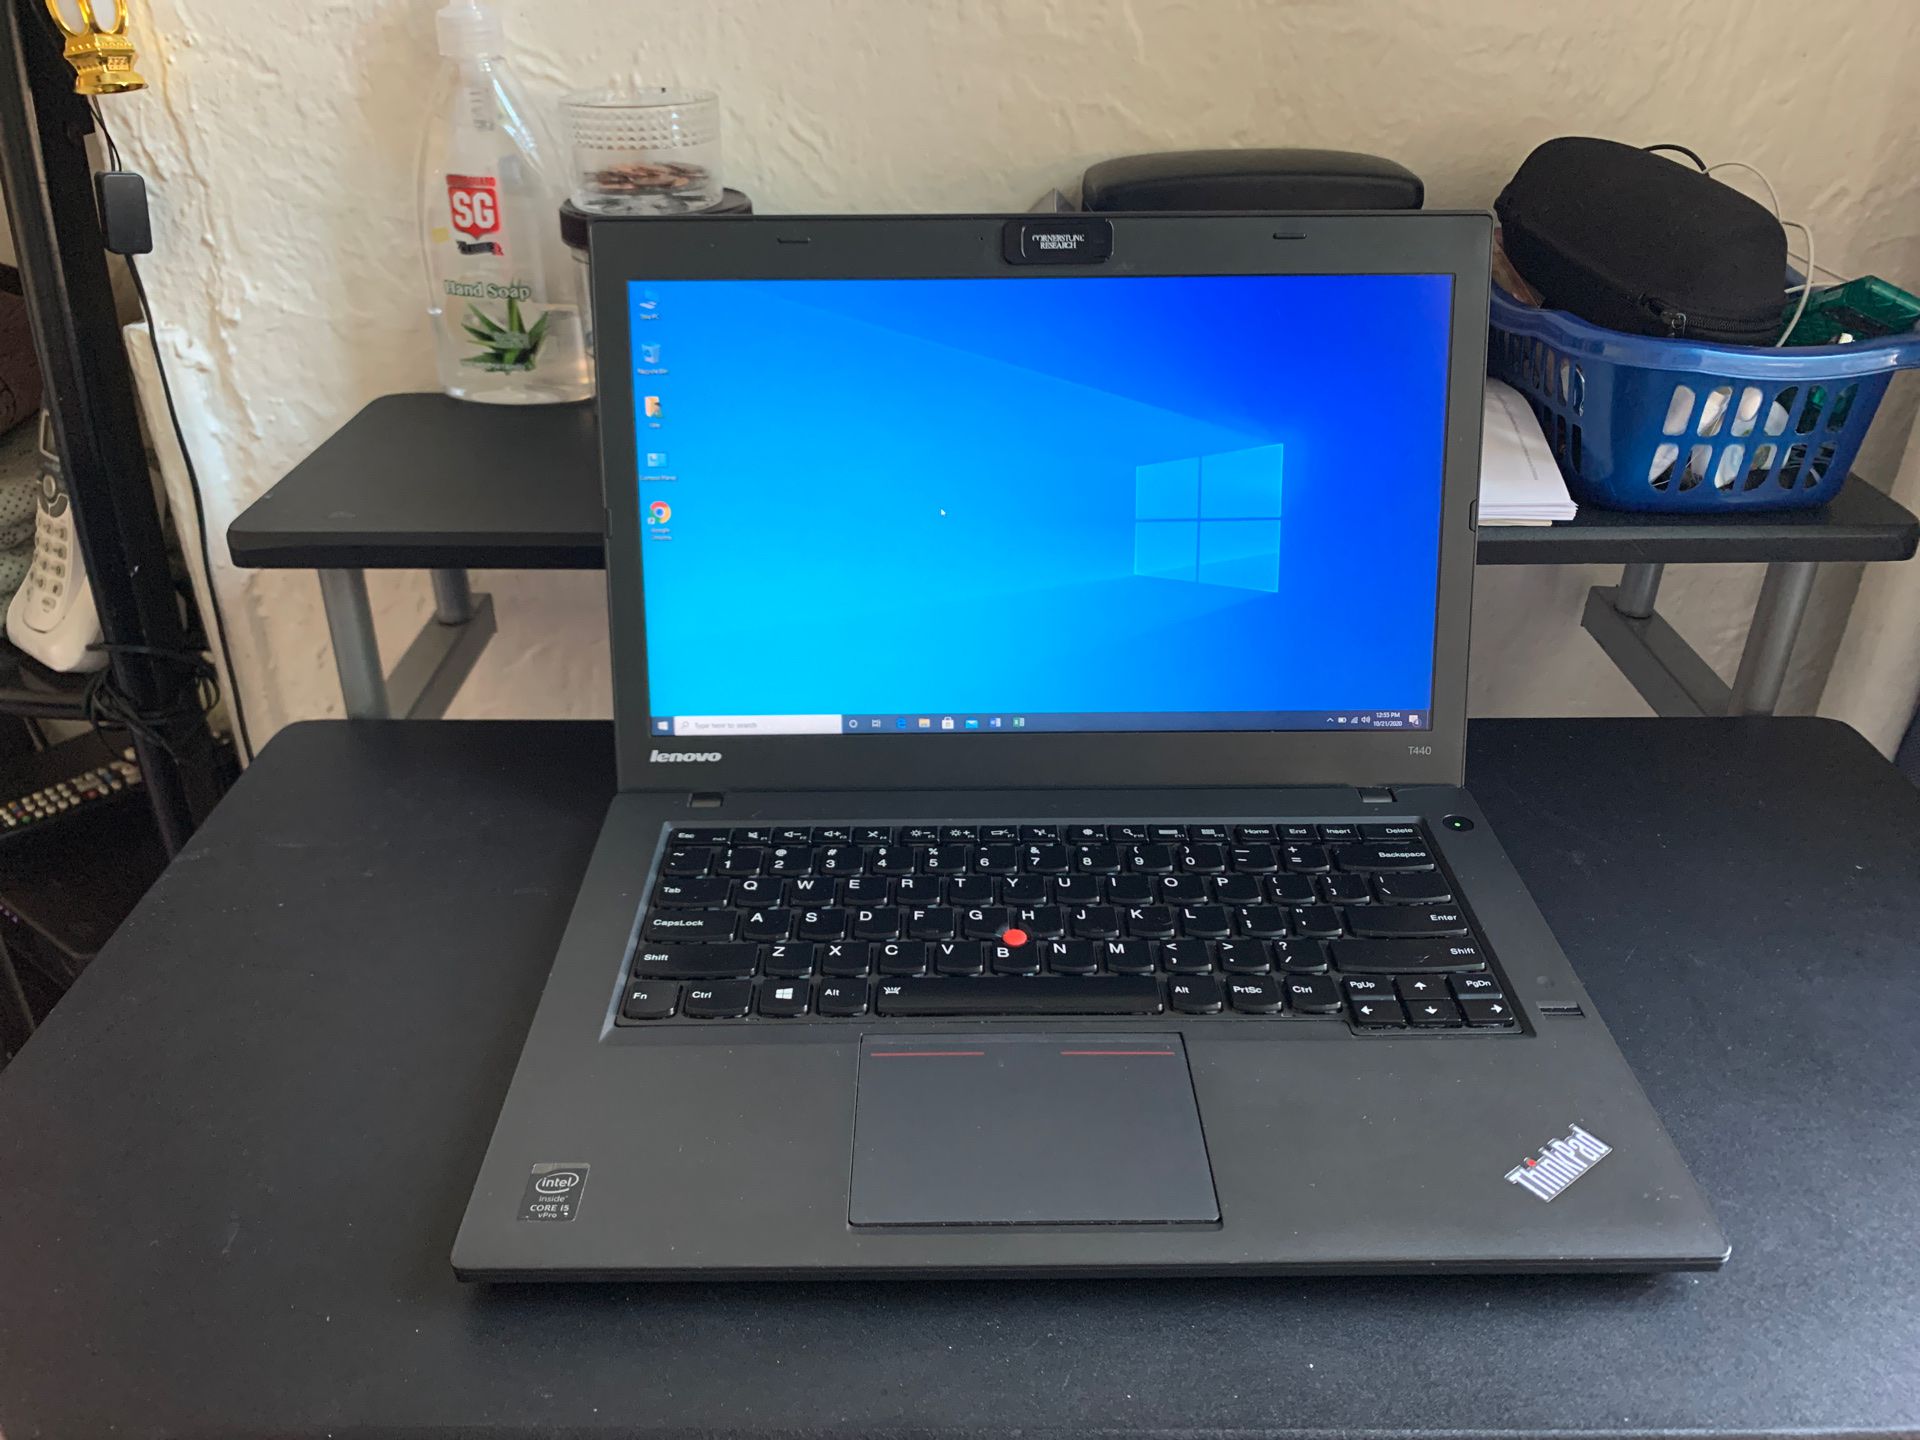 “LENOVO T440” powerful laptop Intel core (TM) i5-4600U CPU @ 2.10 GHz 2.69 GHz , 8 GB RAM,256 SSD with fully installed/ licensed Windows 10 and packa